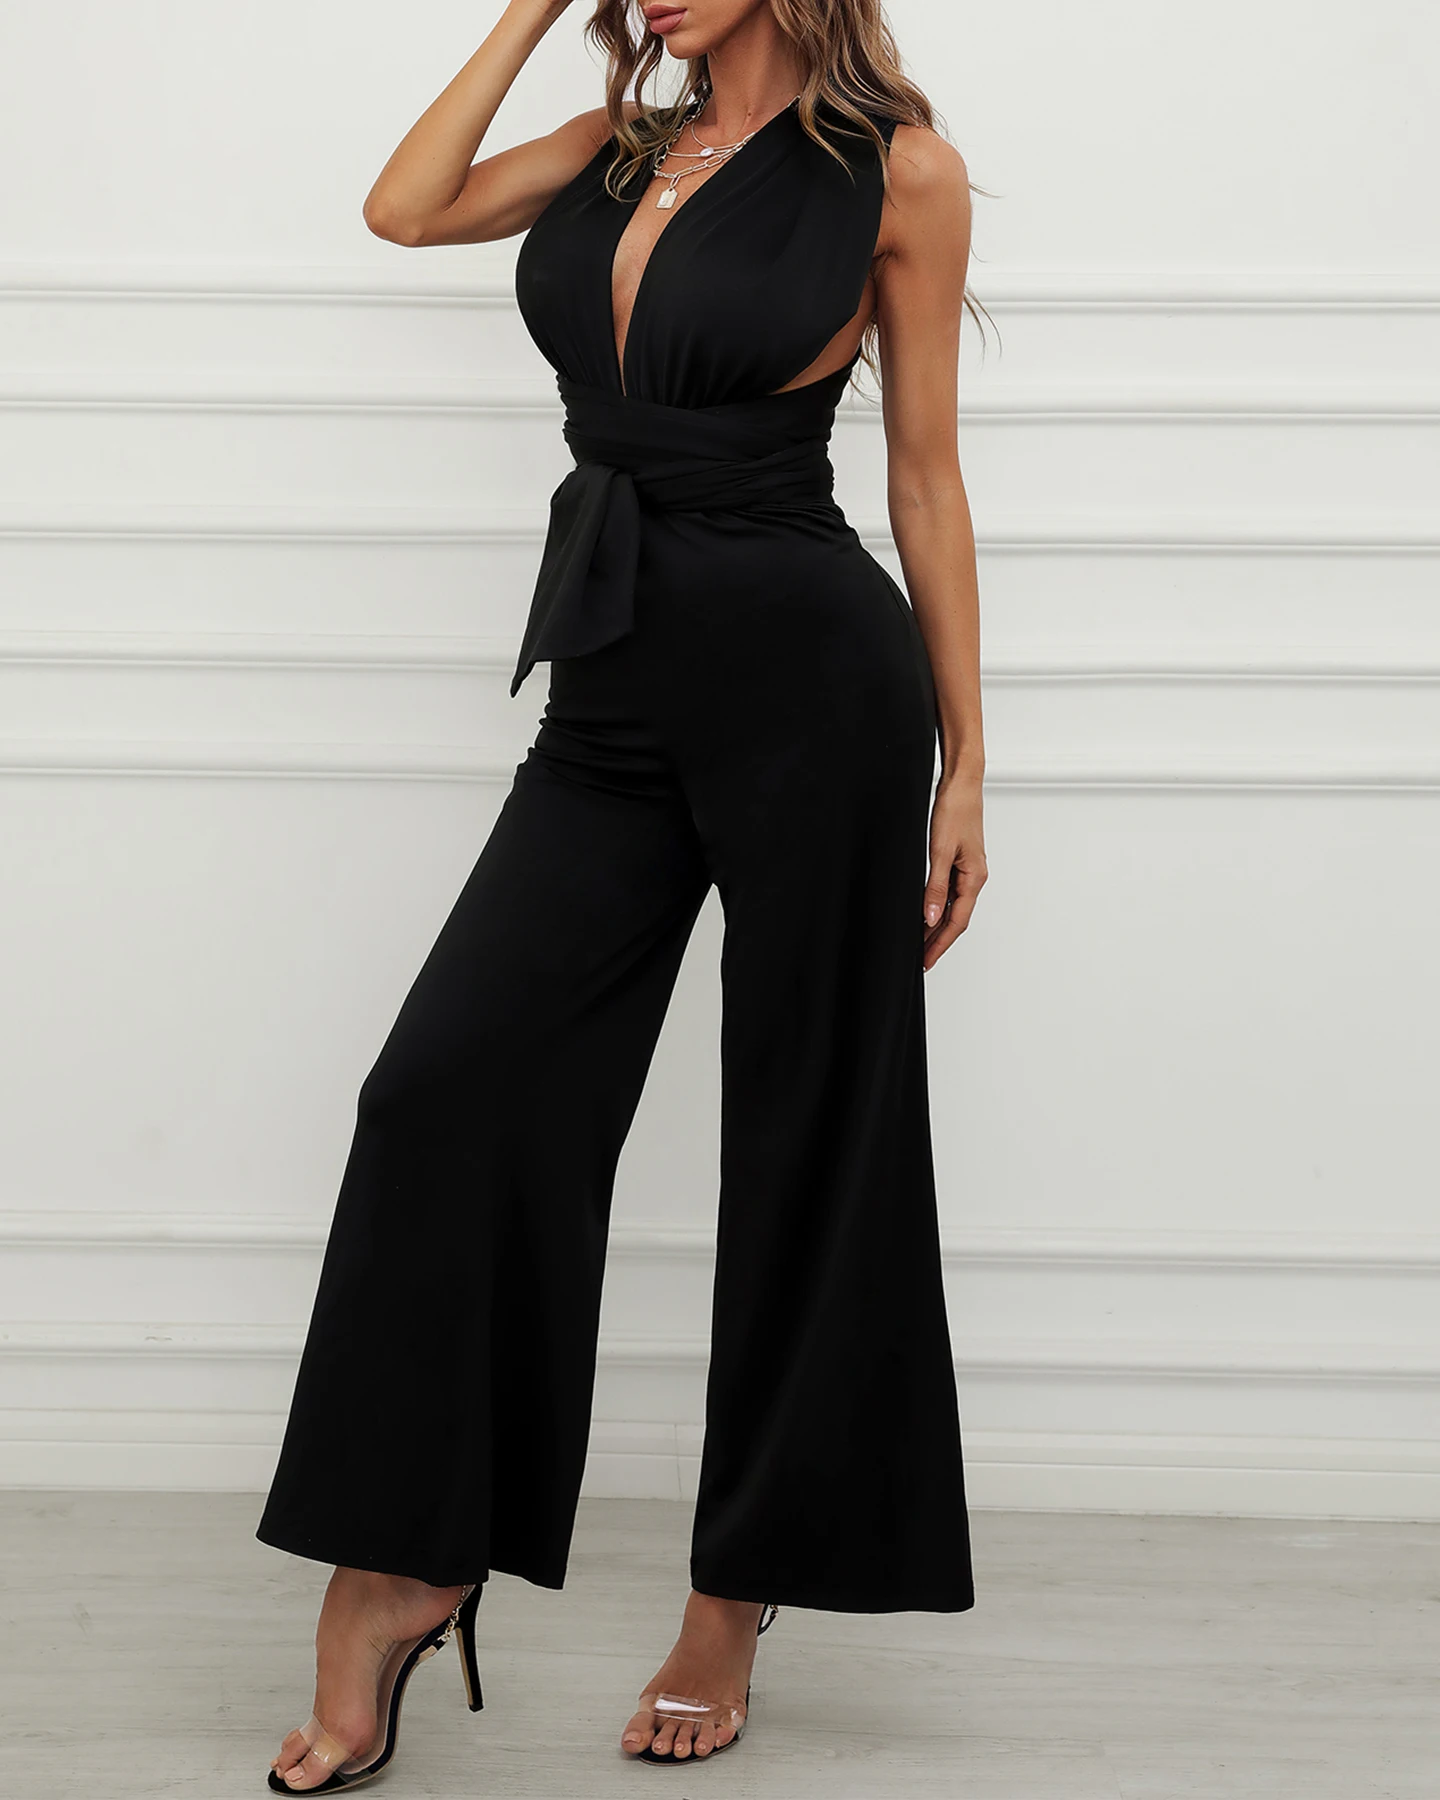 

Summer Women Plain V Neck Knotted Flared Jumpsuit 2021 Femme Crossed Back Long Wide Pants Rompers Office Lady Overalls New traf